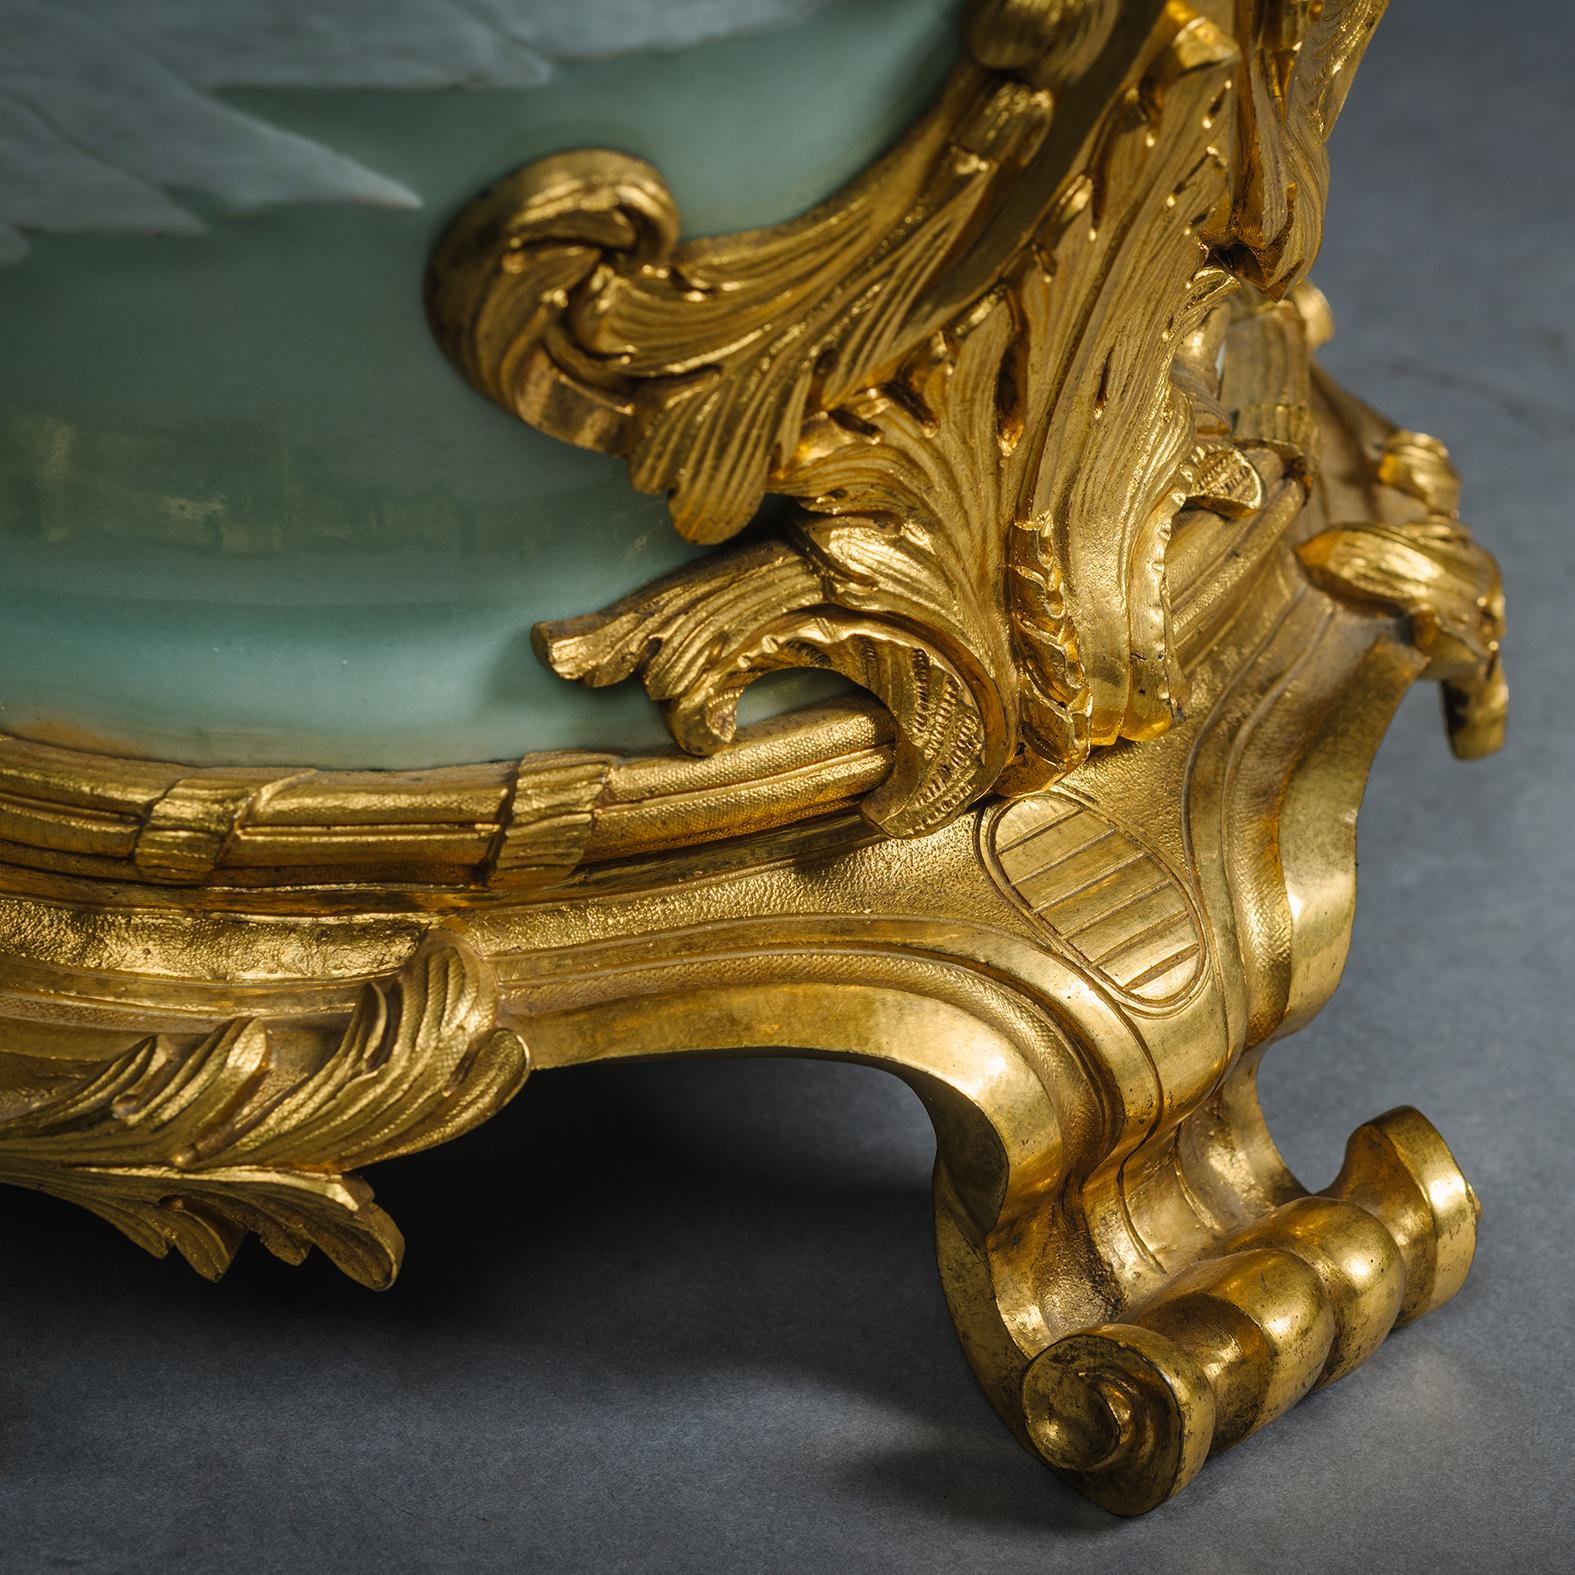 19th Century Pair of Gilt-Bronze Mounted Chinese Celadon-Ground Porcelain Vases For Sale